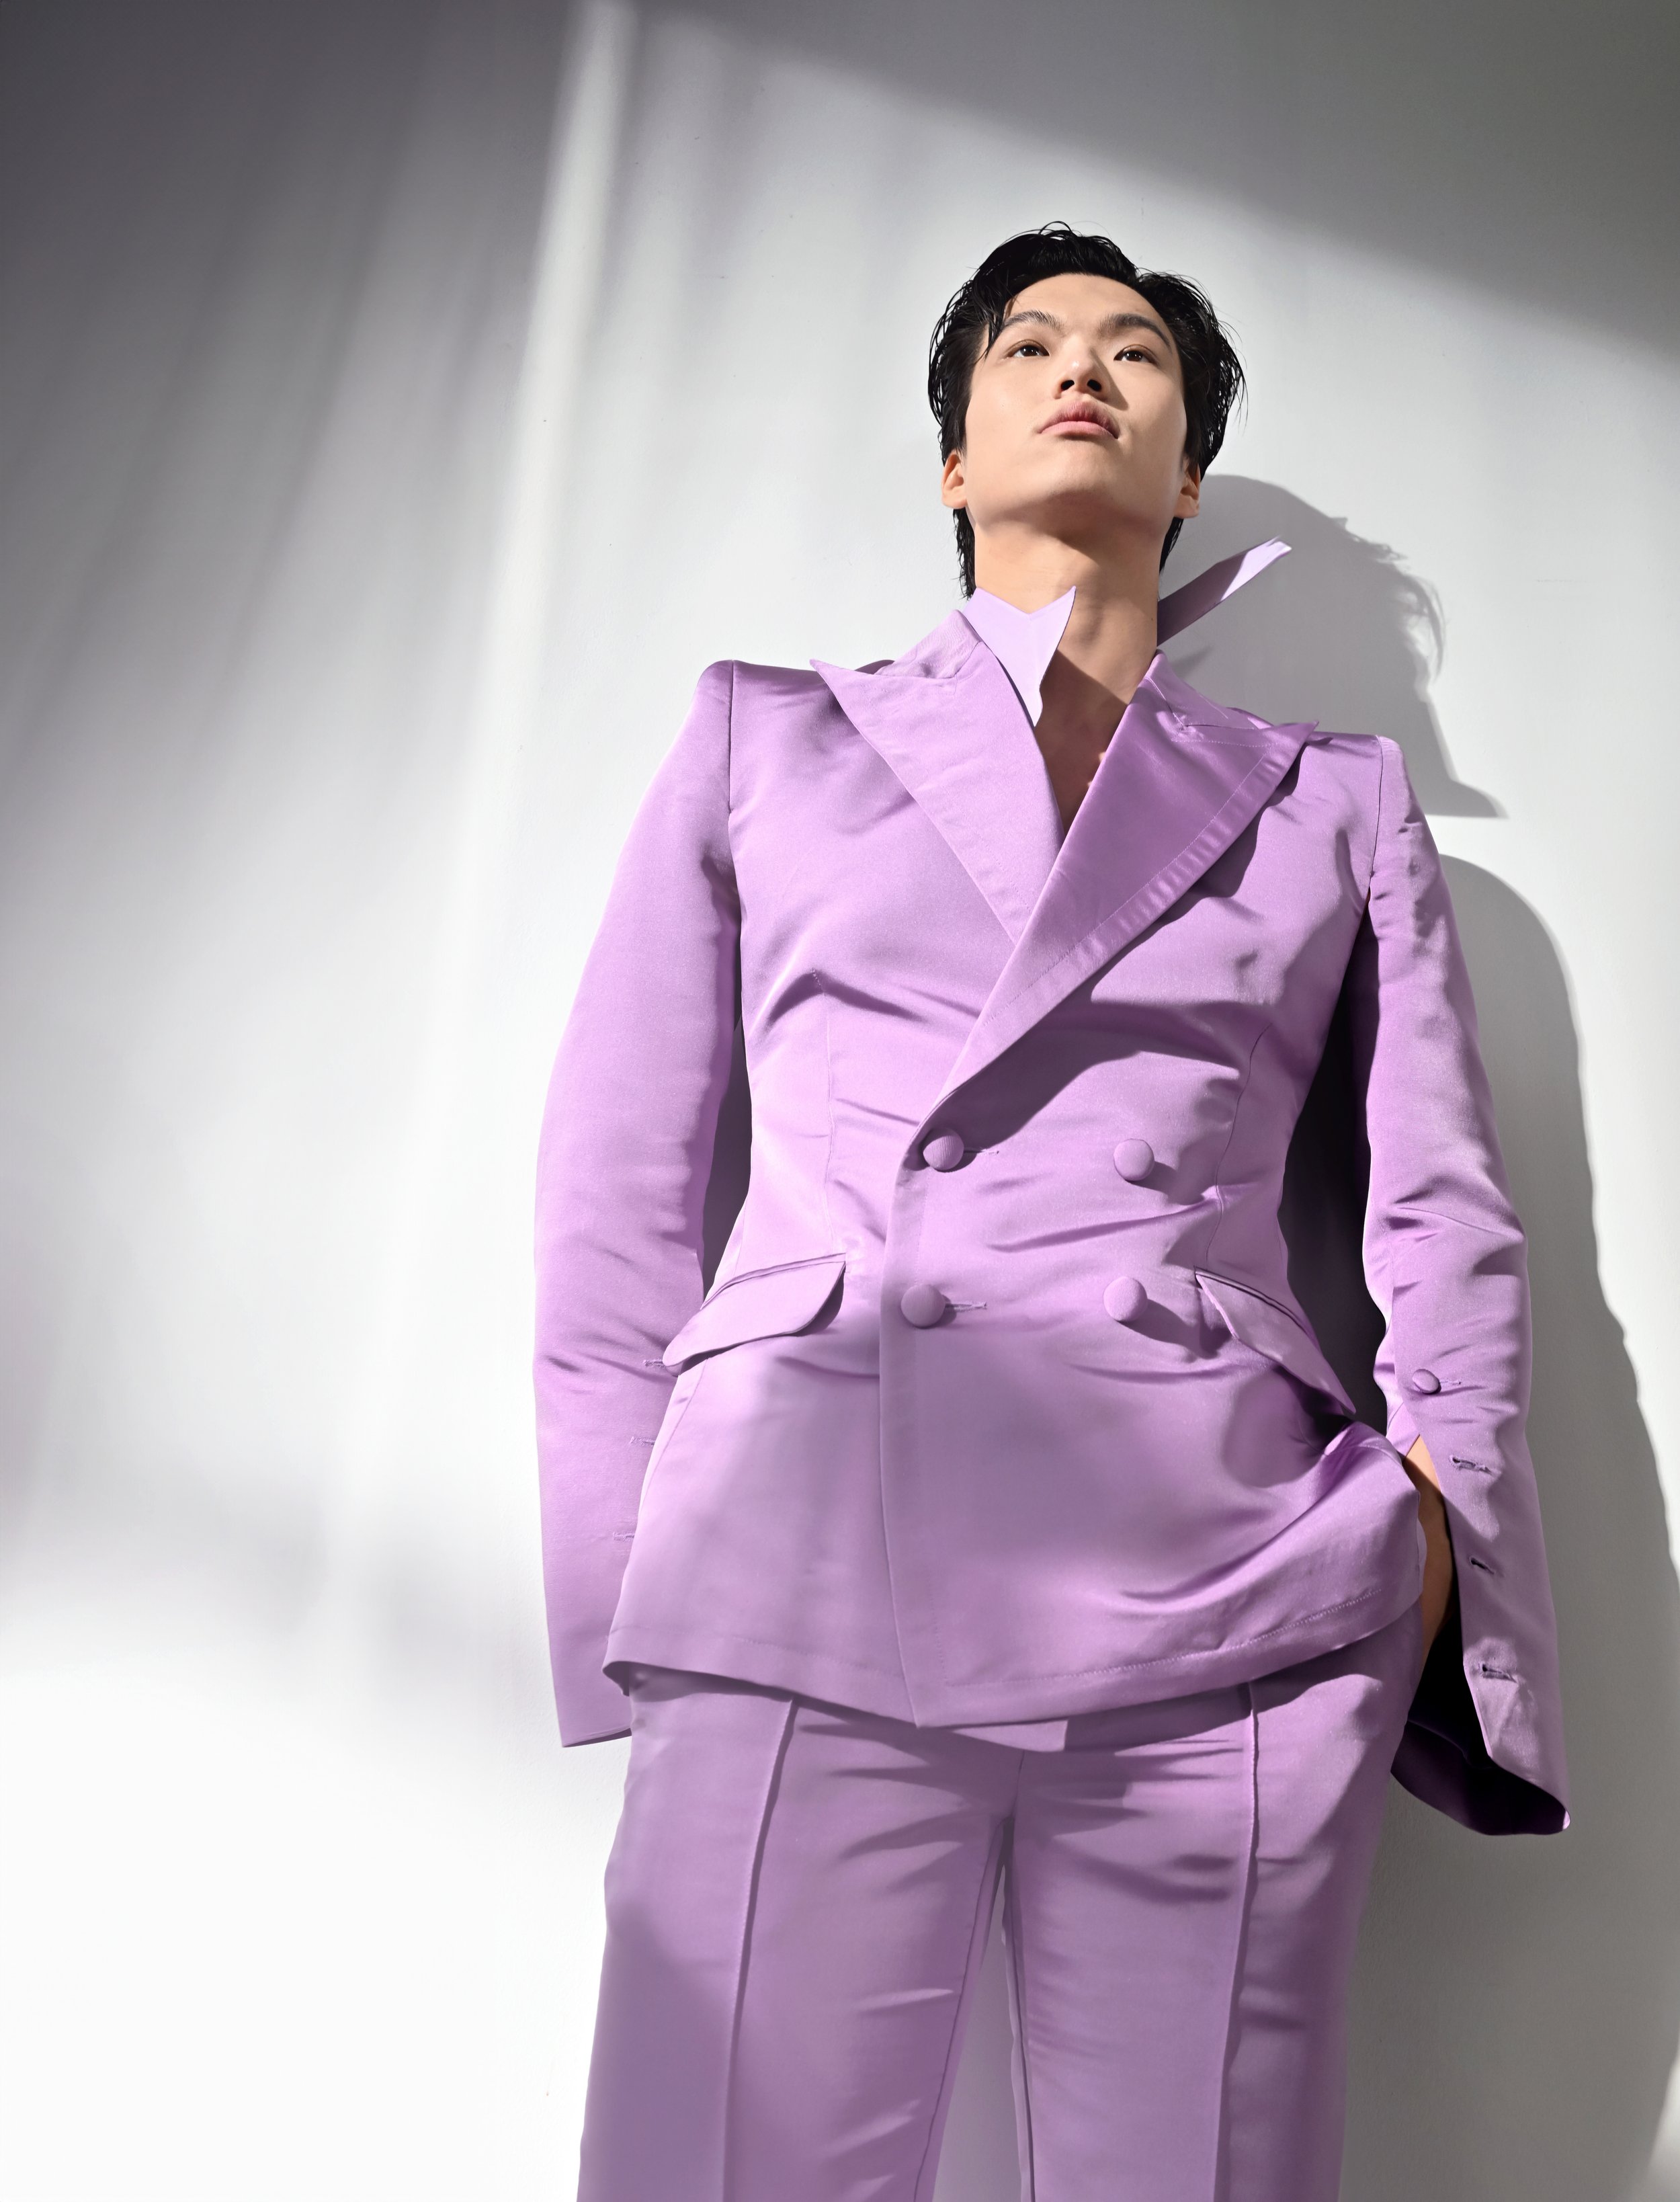 Lavender Suit for Spring - photo by Andrew Werner, NZ8_5644.jpg